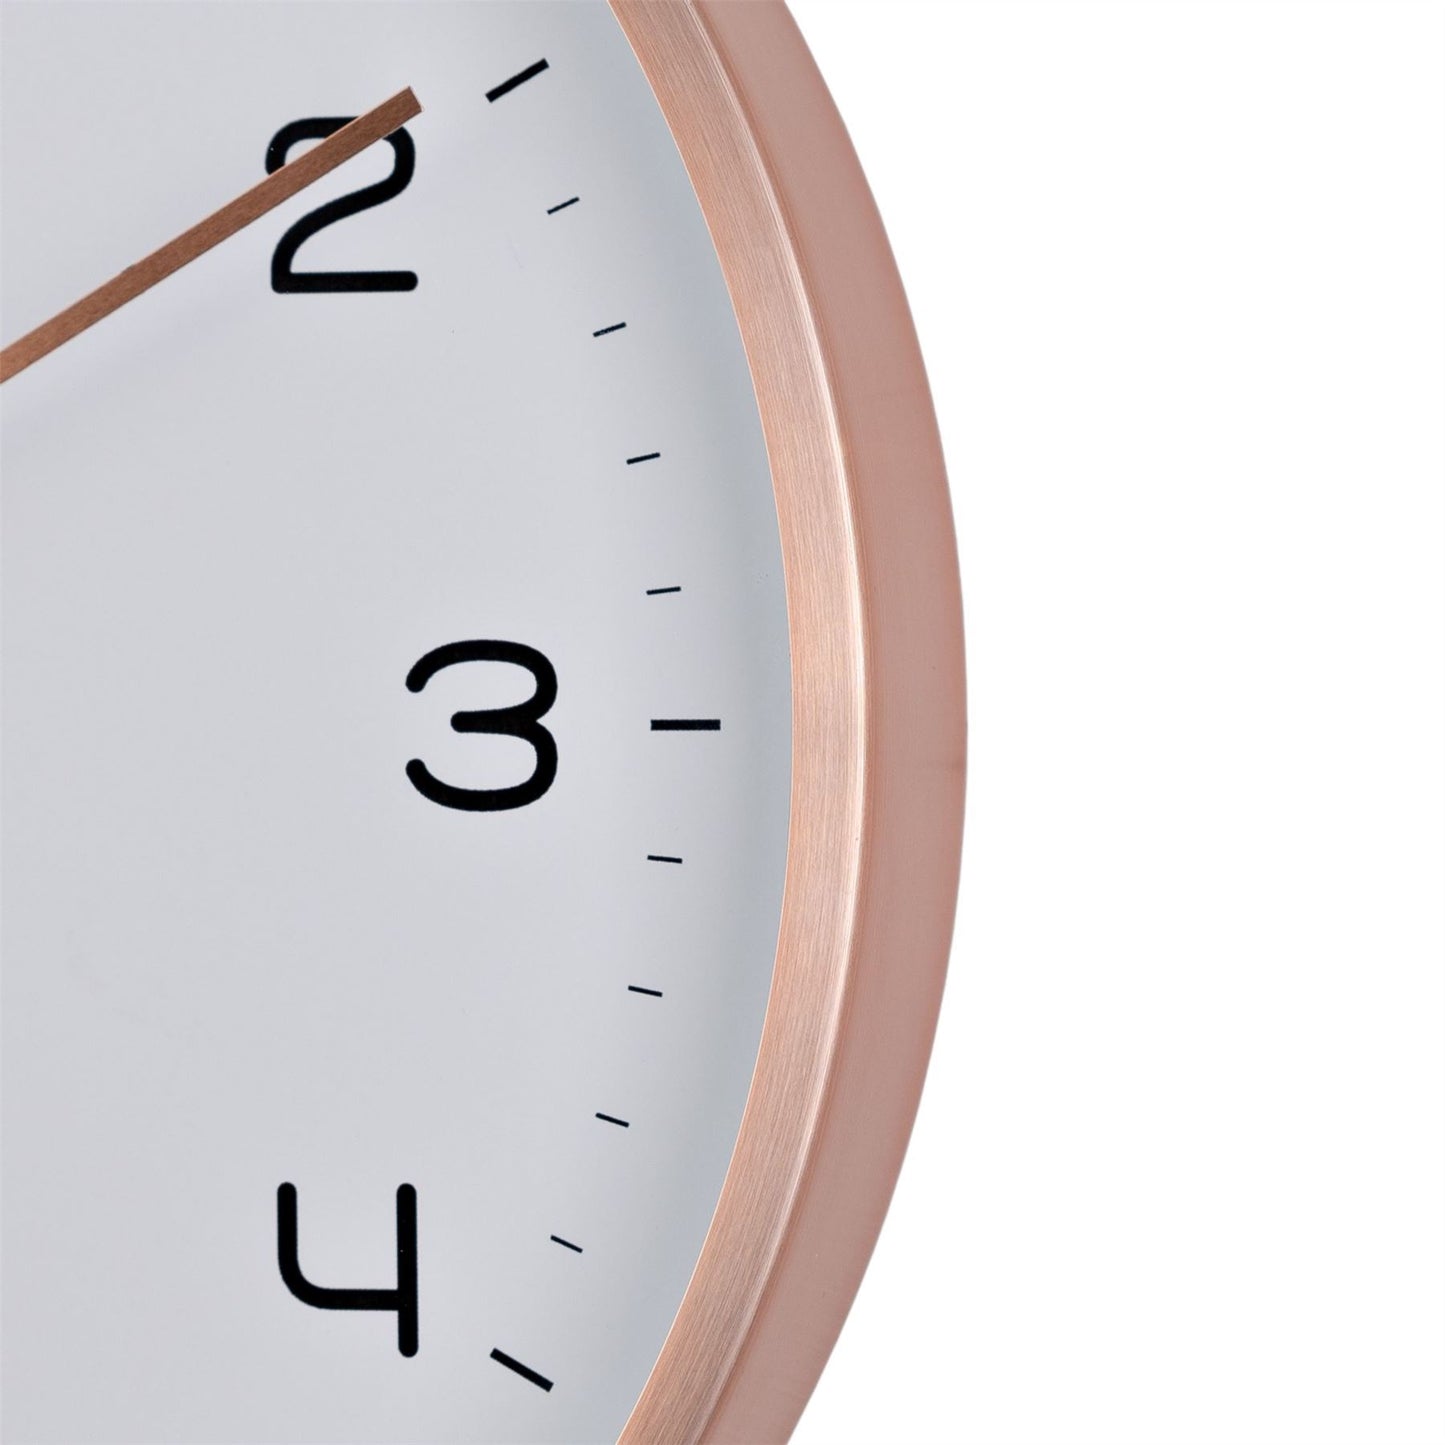 Hometime Round Rose Gold Metal Wall Clock White Dial 12"